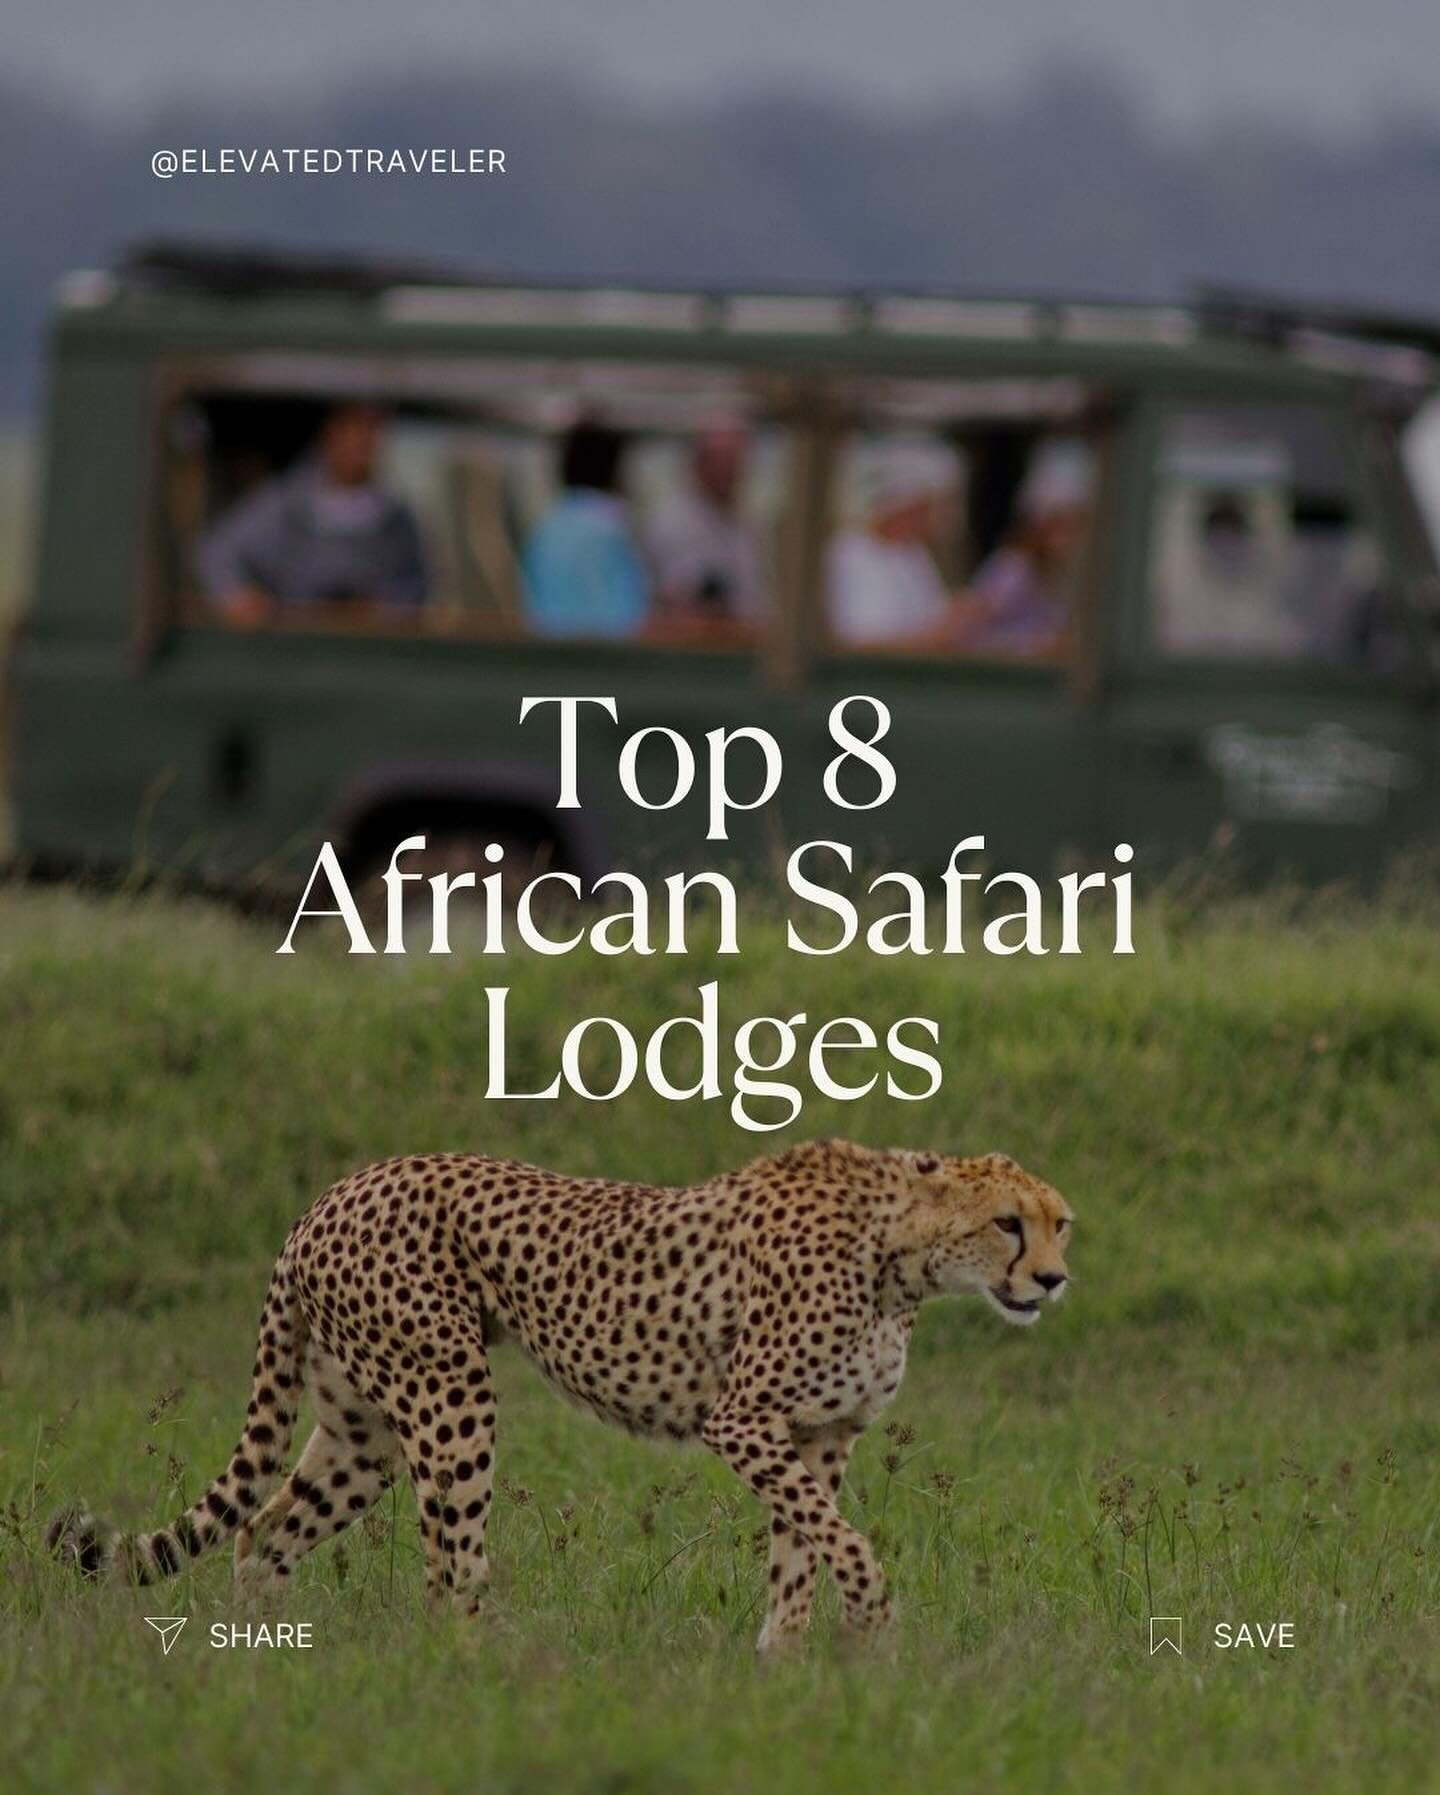 &ldquo;Explore captivating African safari destinations for an exciting wildlife adventure in Africa.&rdquo; 🦒🐅🐘 

Have you ever been on an African Safari?
.
.
.
#travel #wunderlust #destination #african #safari #vacation #travelblogger #travelling